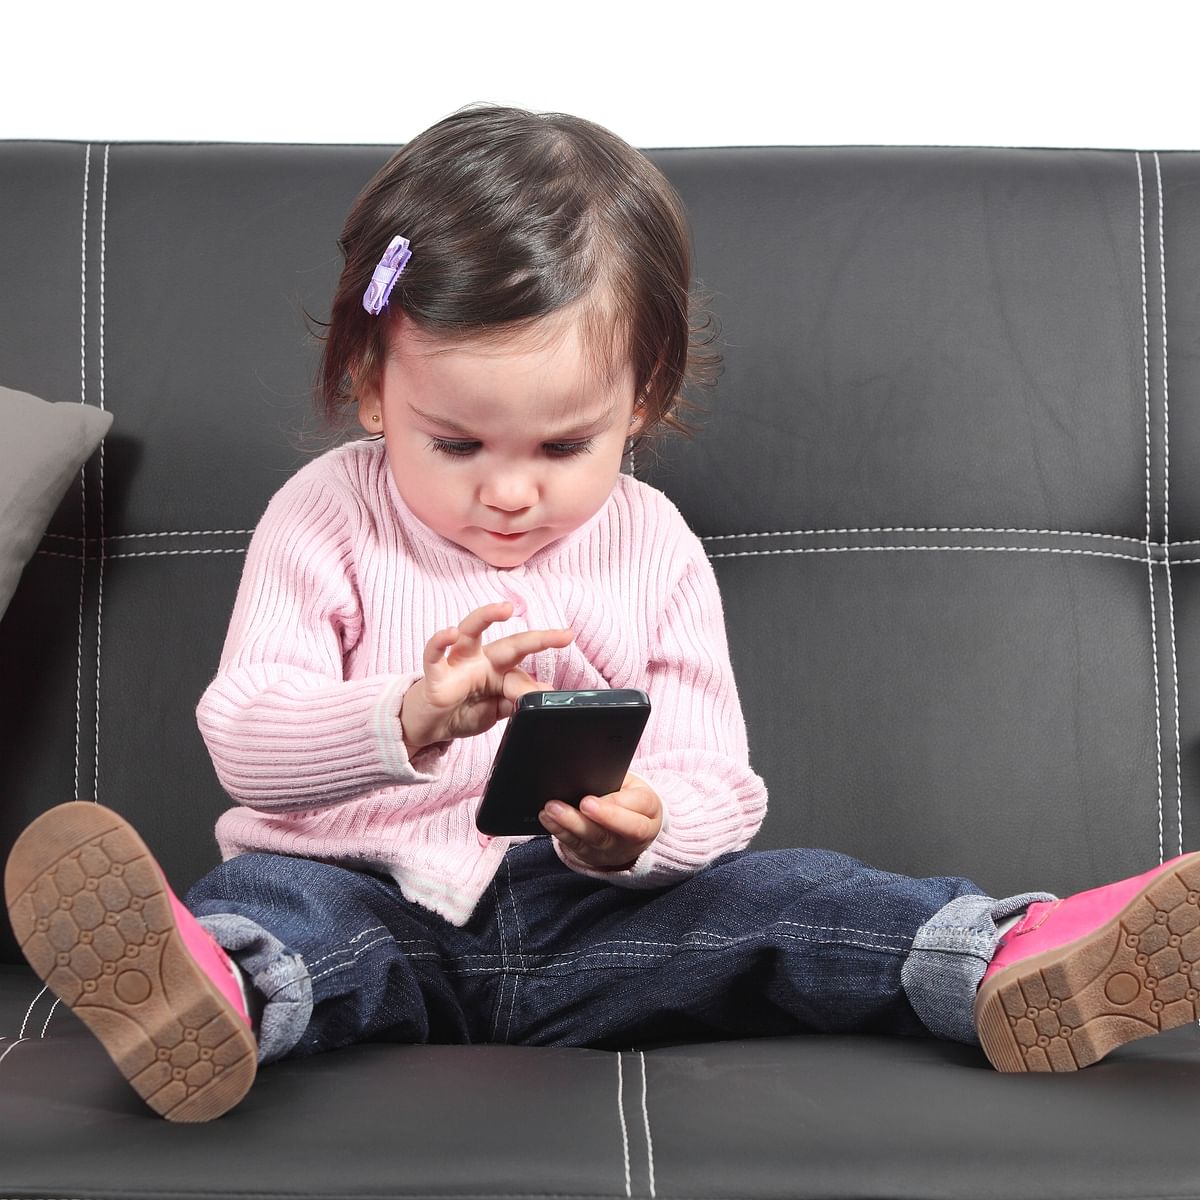 Mobile apps can make toddlers smarter